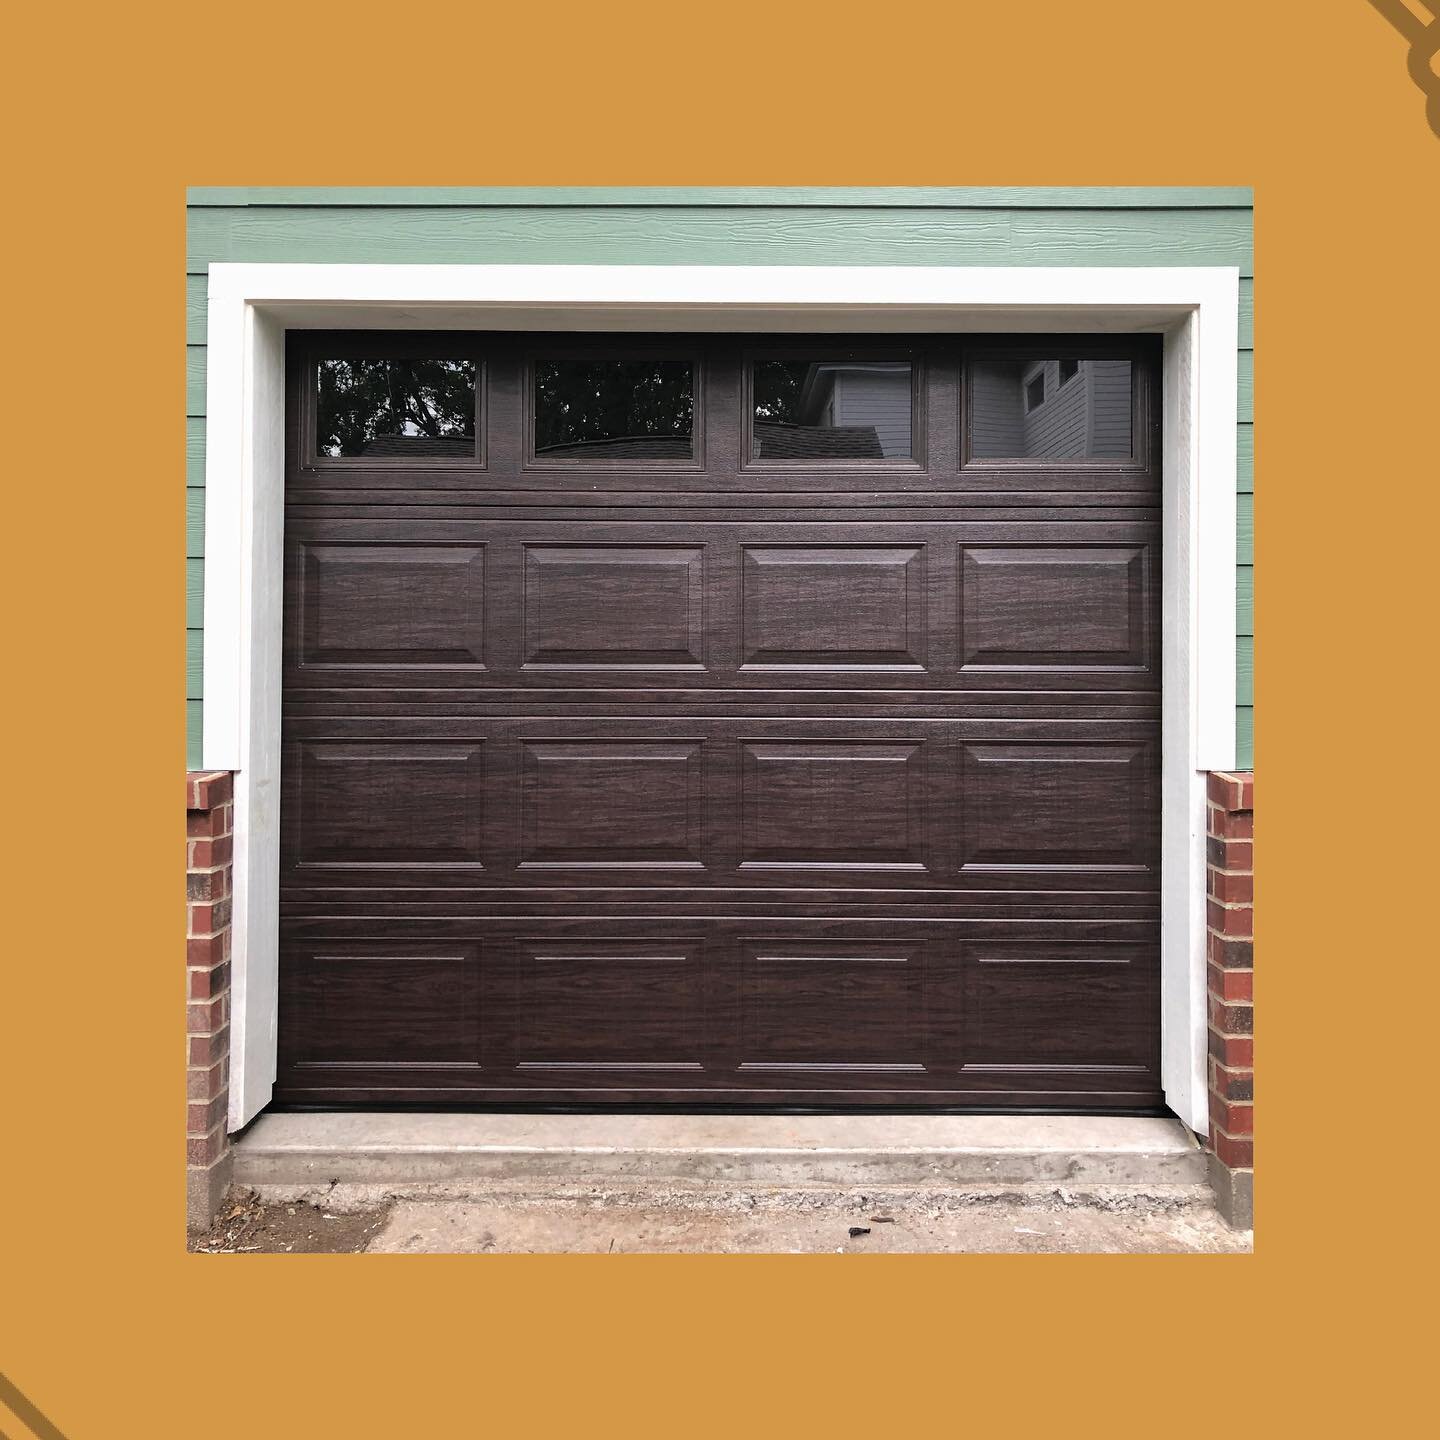 We recently installed these new special order wood tone garage doors in the heights area!
Want to give your house a new look? Give us a call today! 
#garage #garagedoor #garagedoorcompany #garagedoorinstallation #garageopener #garagedoorsofinstagram 